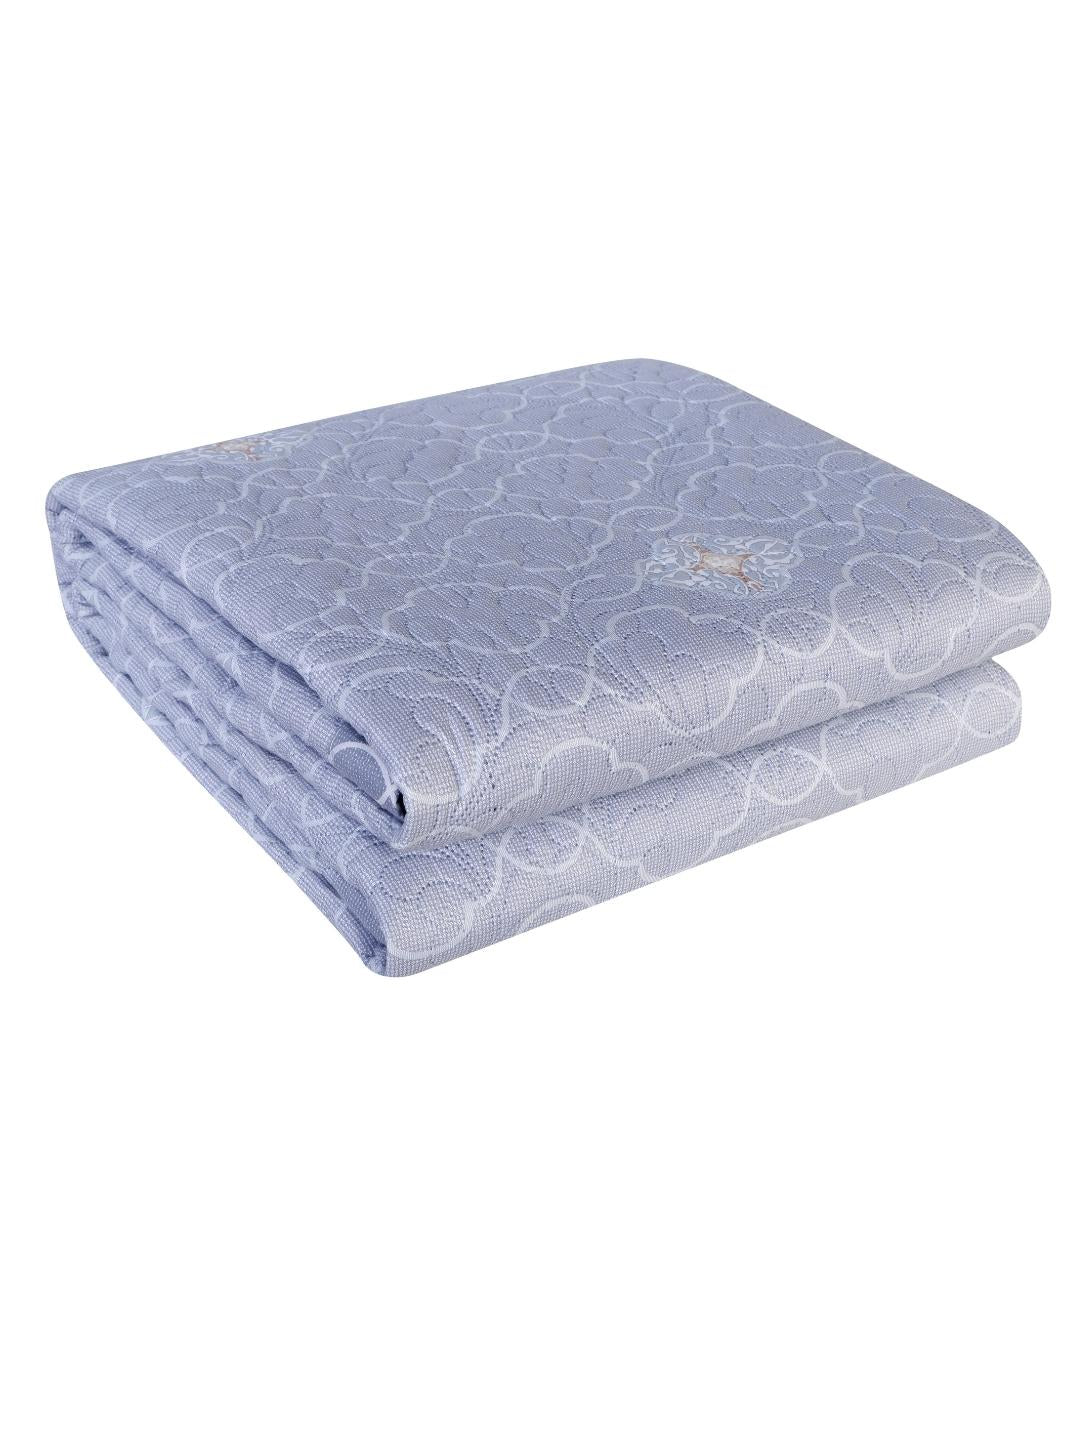 Floral Print Double Bed Light Weight Comforter- Blue and Grey